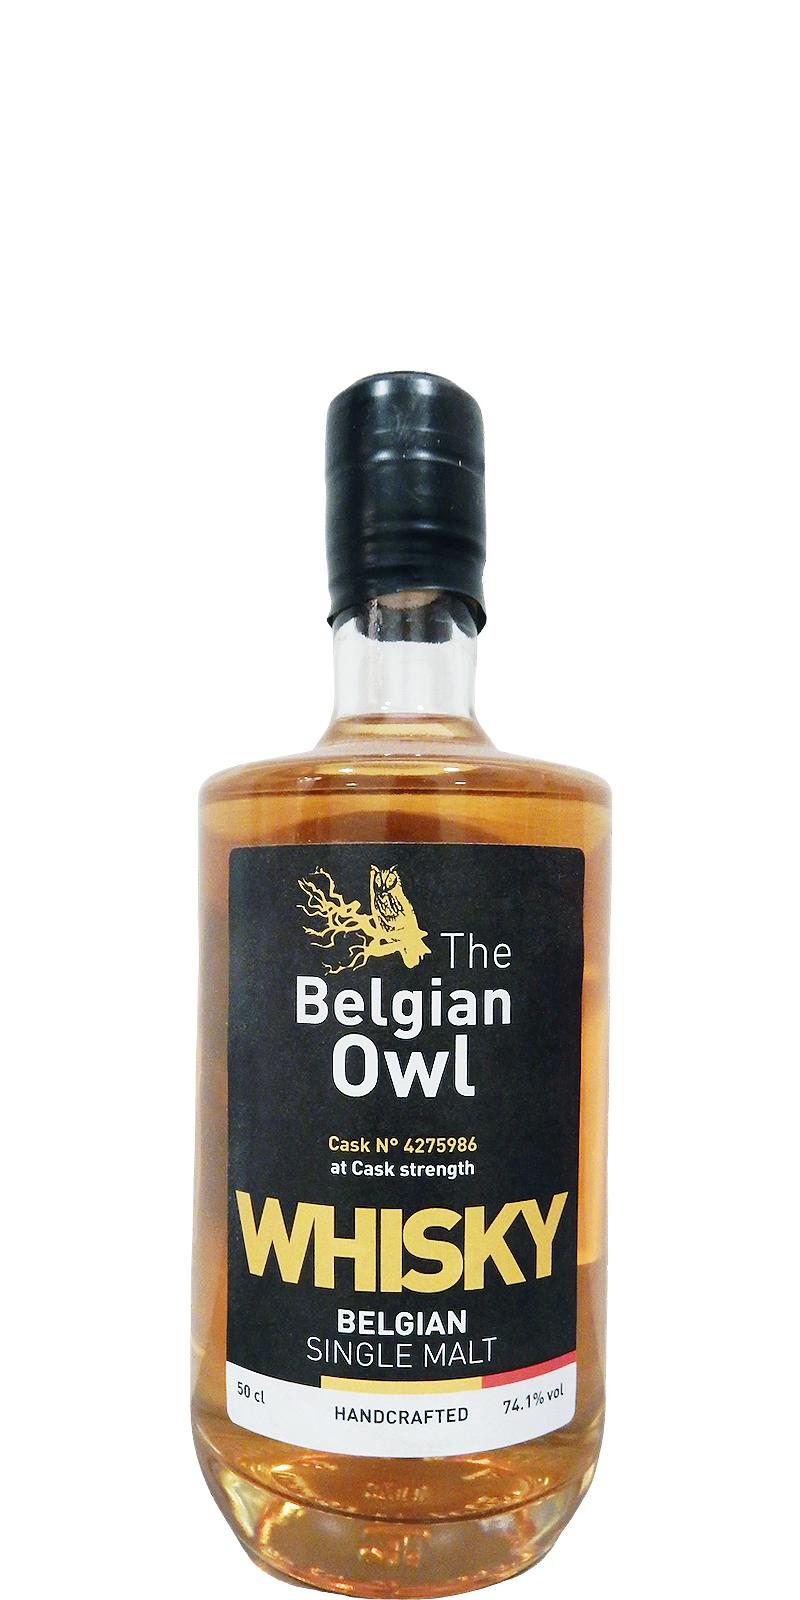 The Belgian Owl 53 months